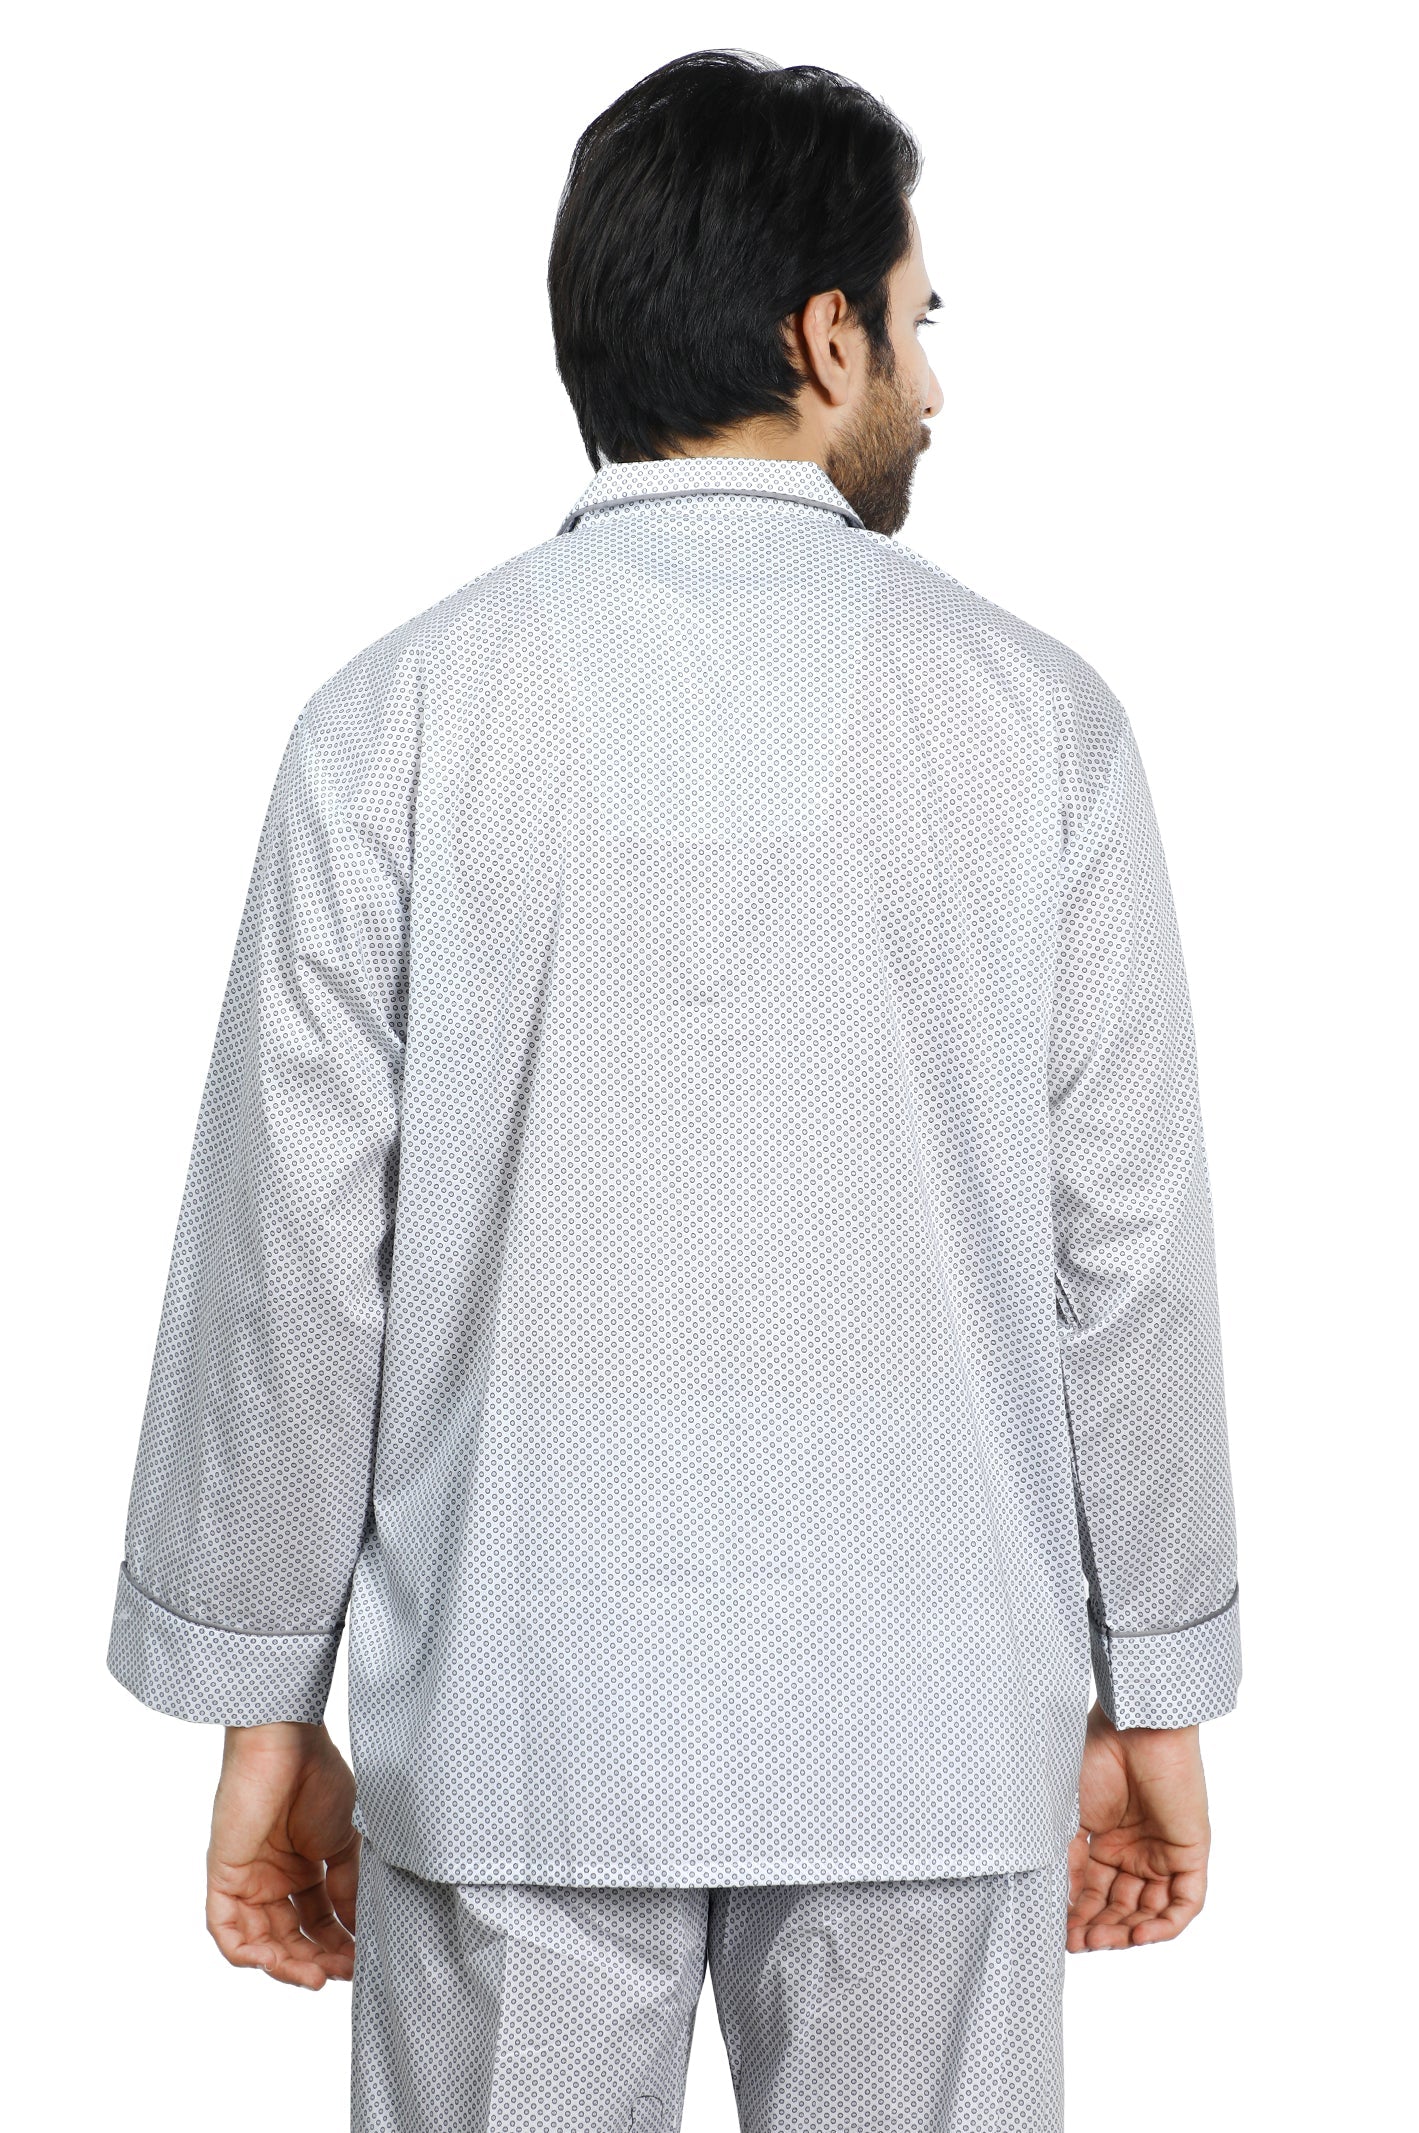 Diner's Night Suit for Men SKU: FNS009-WHITE - Diners